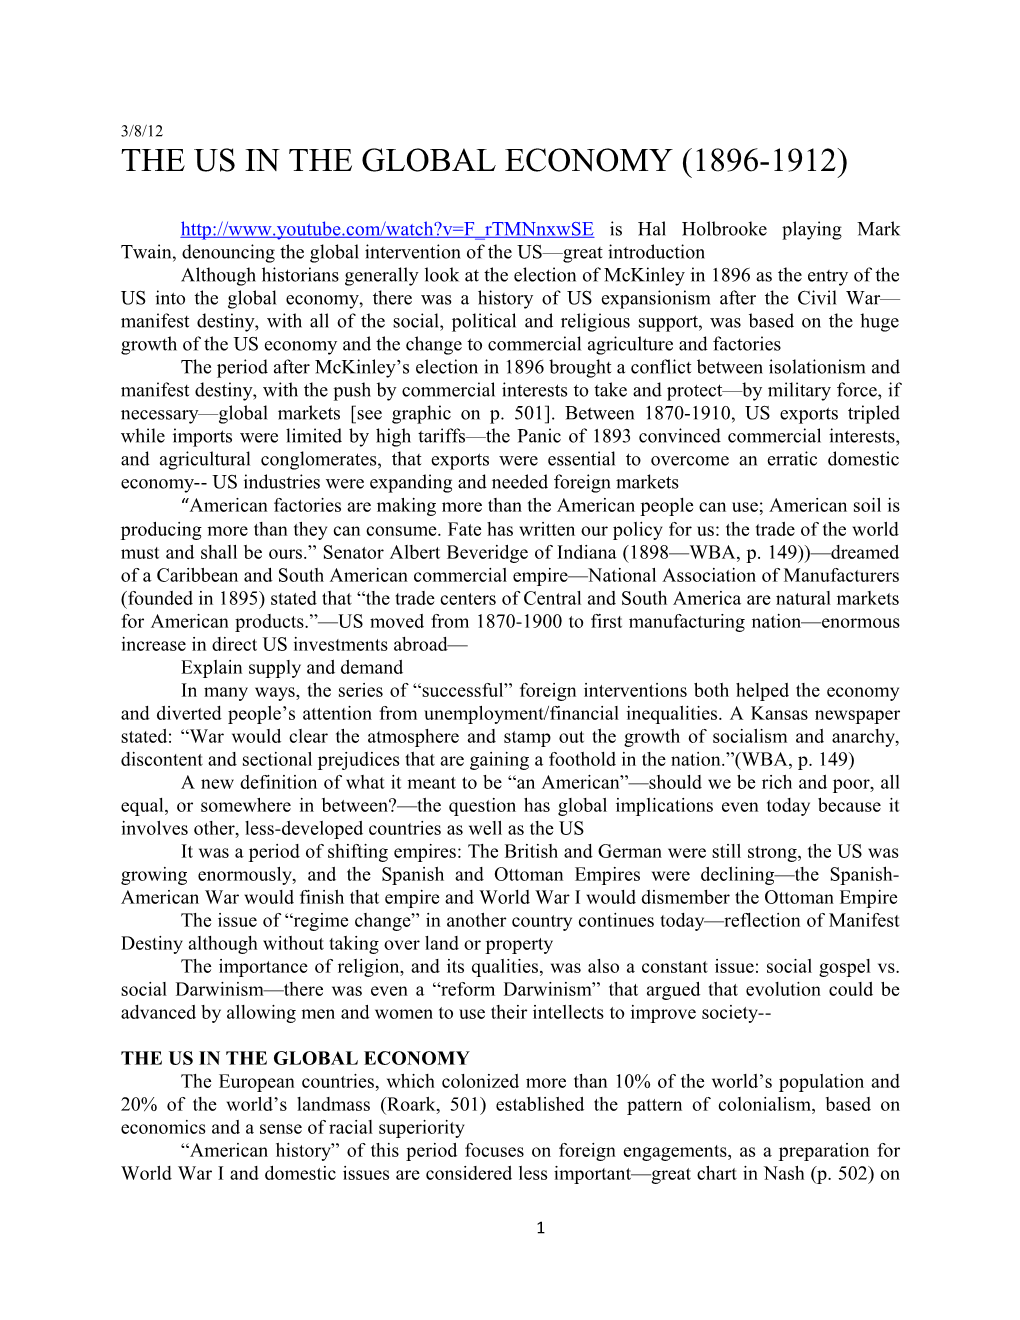 The Us in the Global Economy (1896-1912)